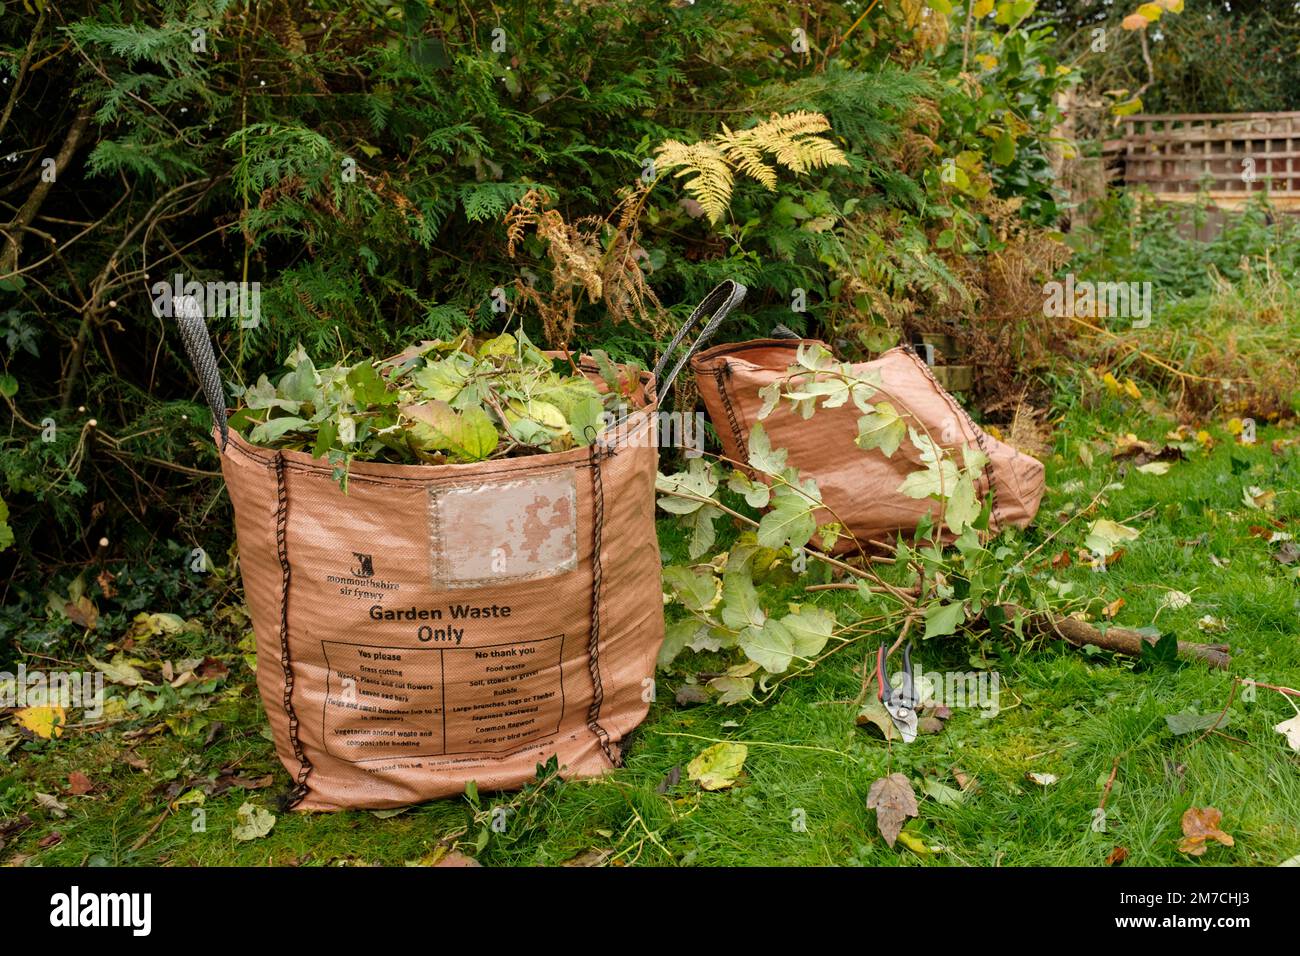 Hedge clippings bagged up ready for recycling in Monmouthshire, Wales. Stock Photo